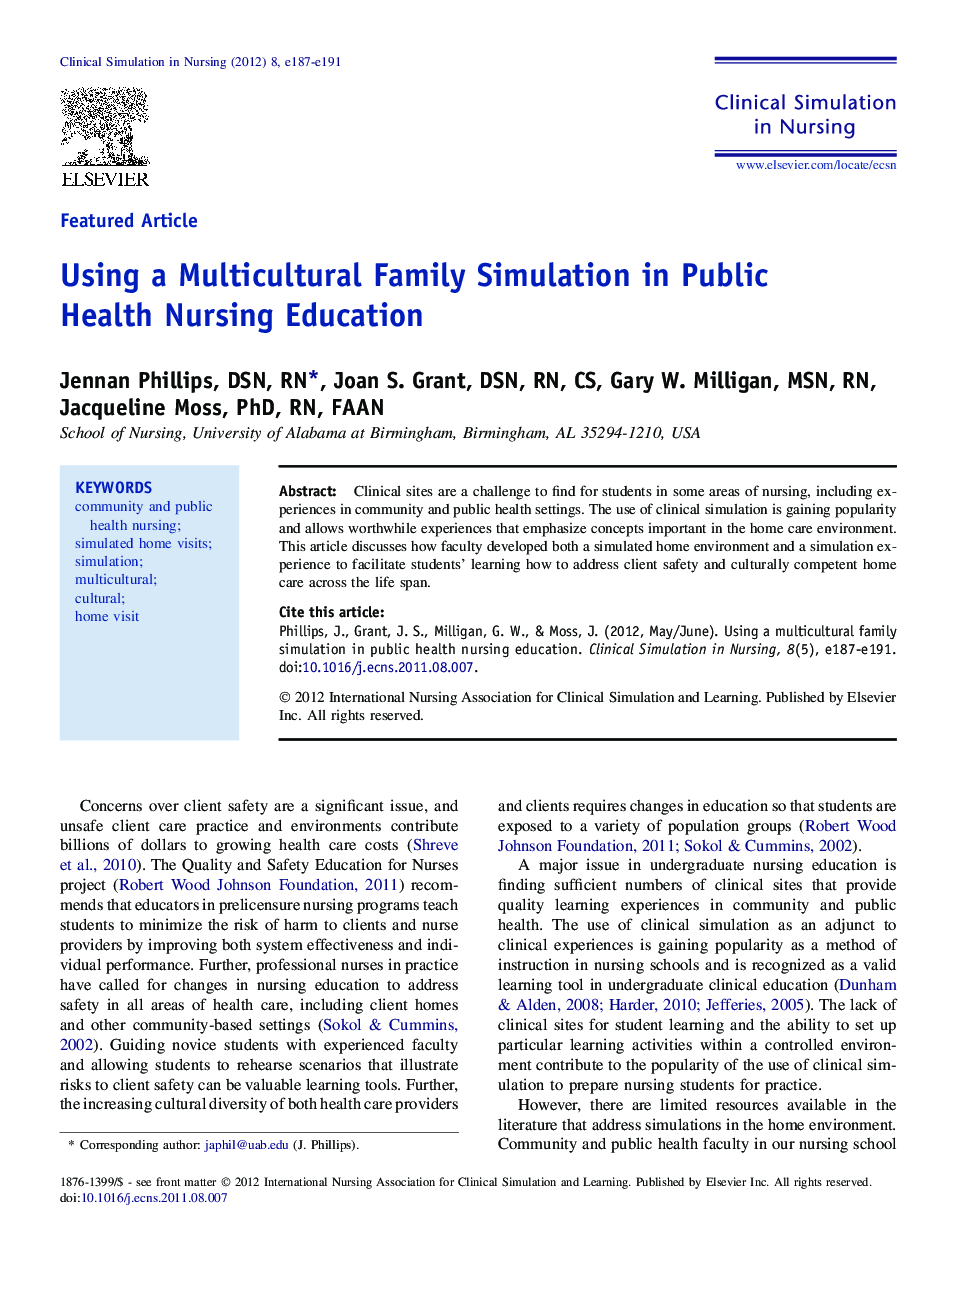 Using a Multicultural Family Simulation in Public Health Nursing Education